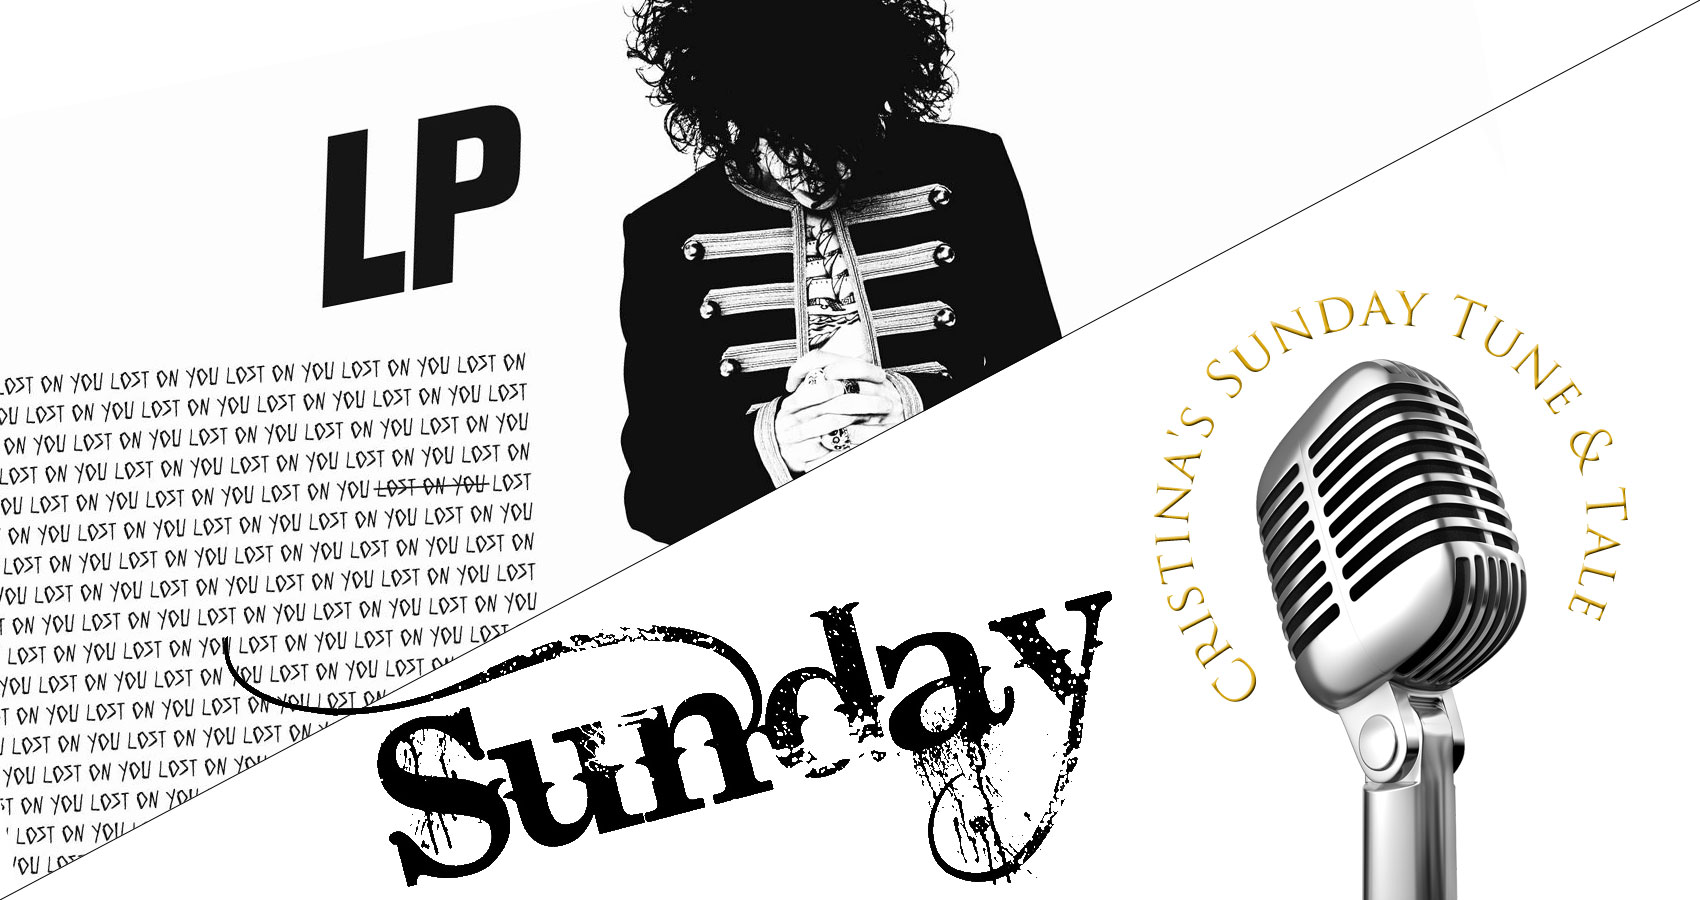 Cristina's Sunday Tune & Tale:- 'Lost on You' by LP written by Cristina Munoz at Spillwords.com